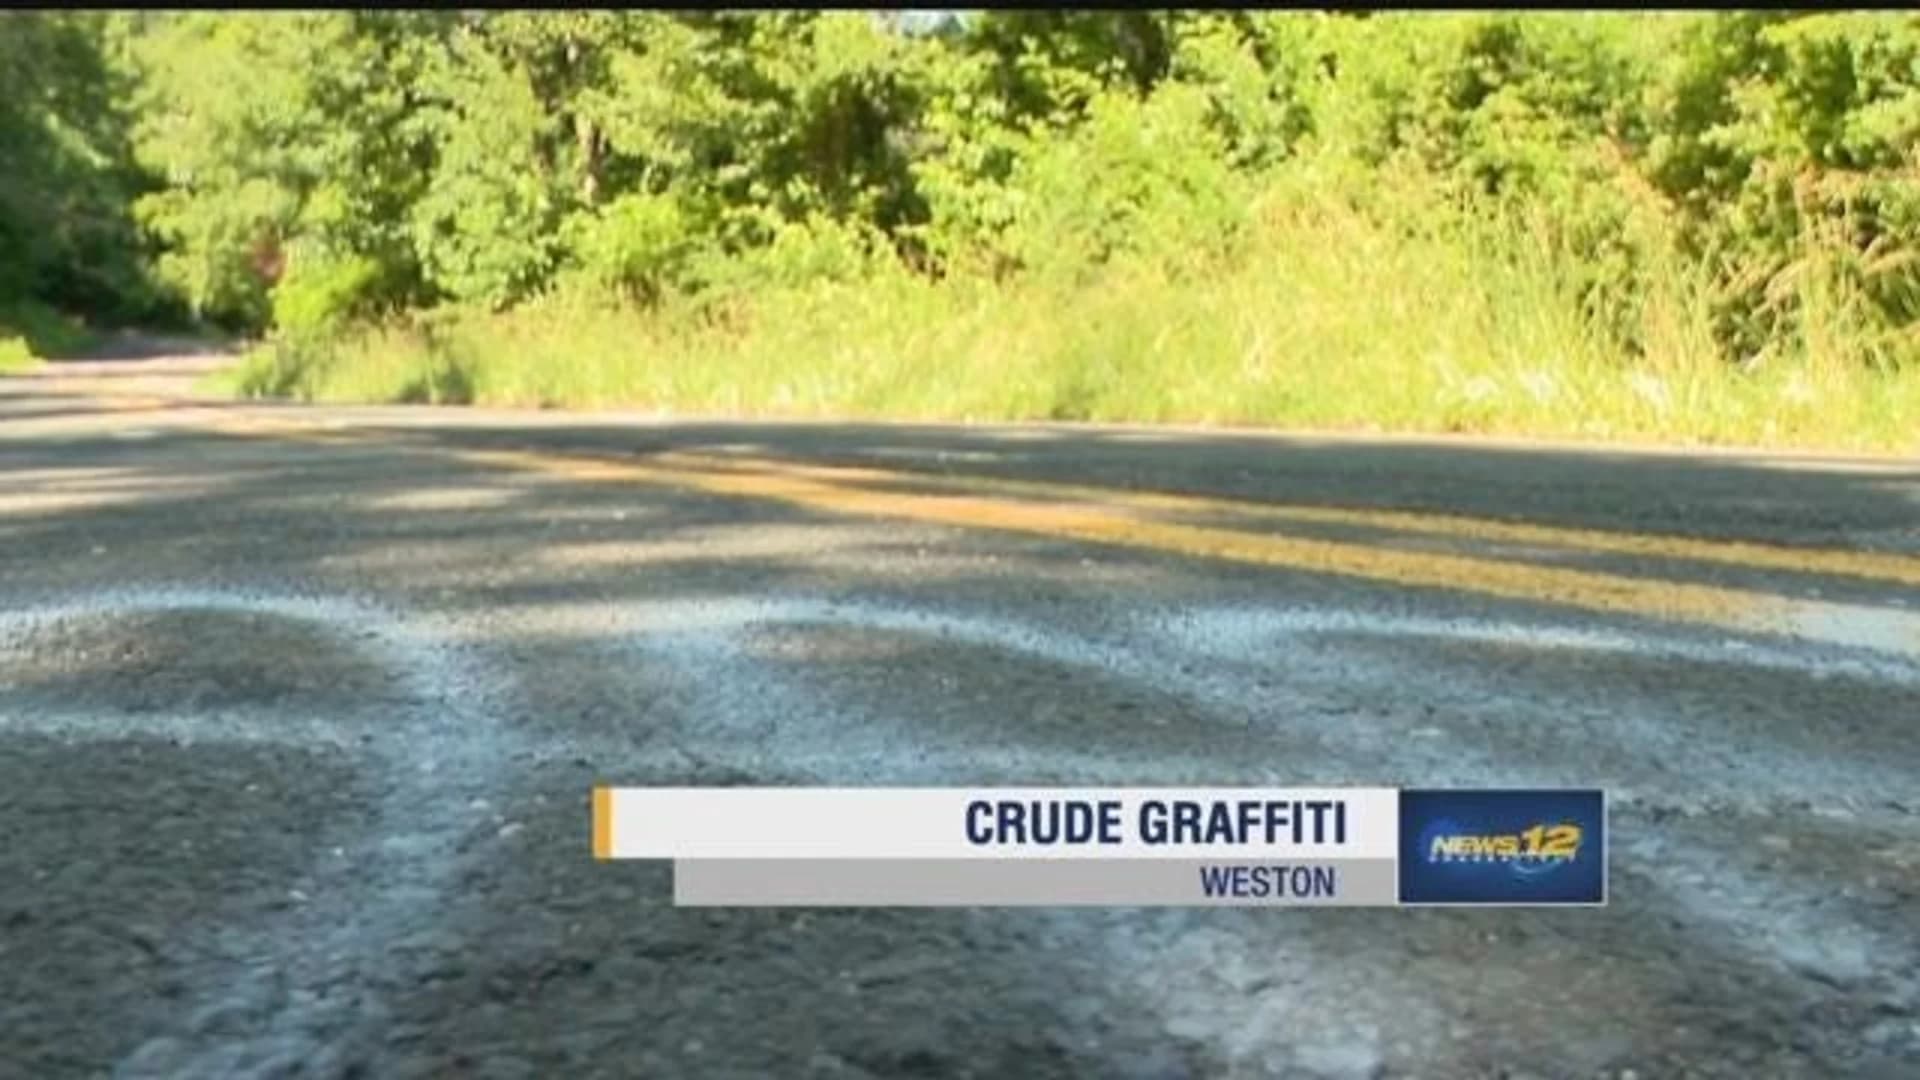 Police: Weston road vandalized with crude graffiti; residents hope road is repaved